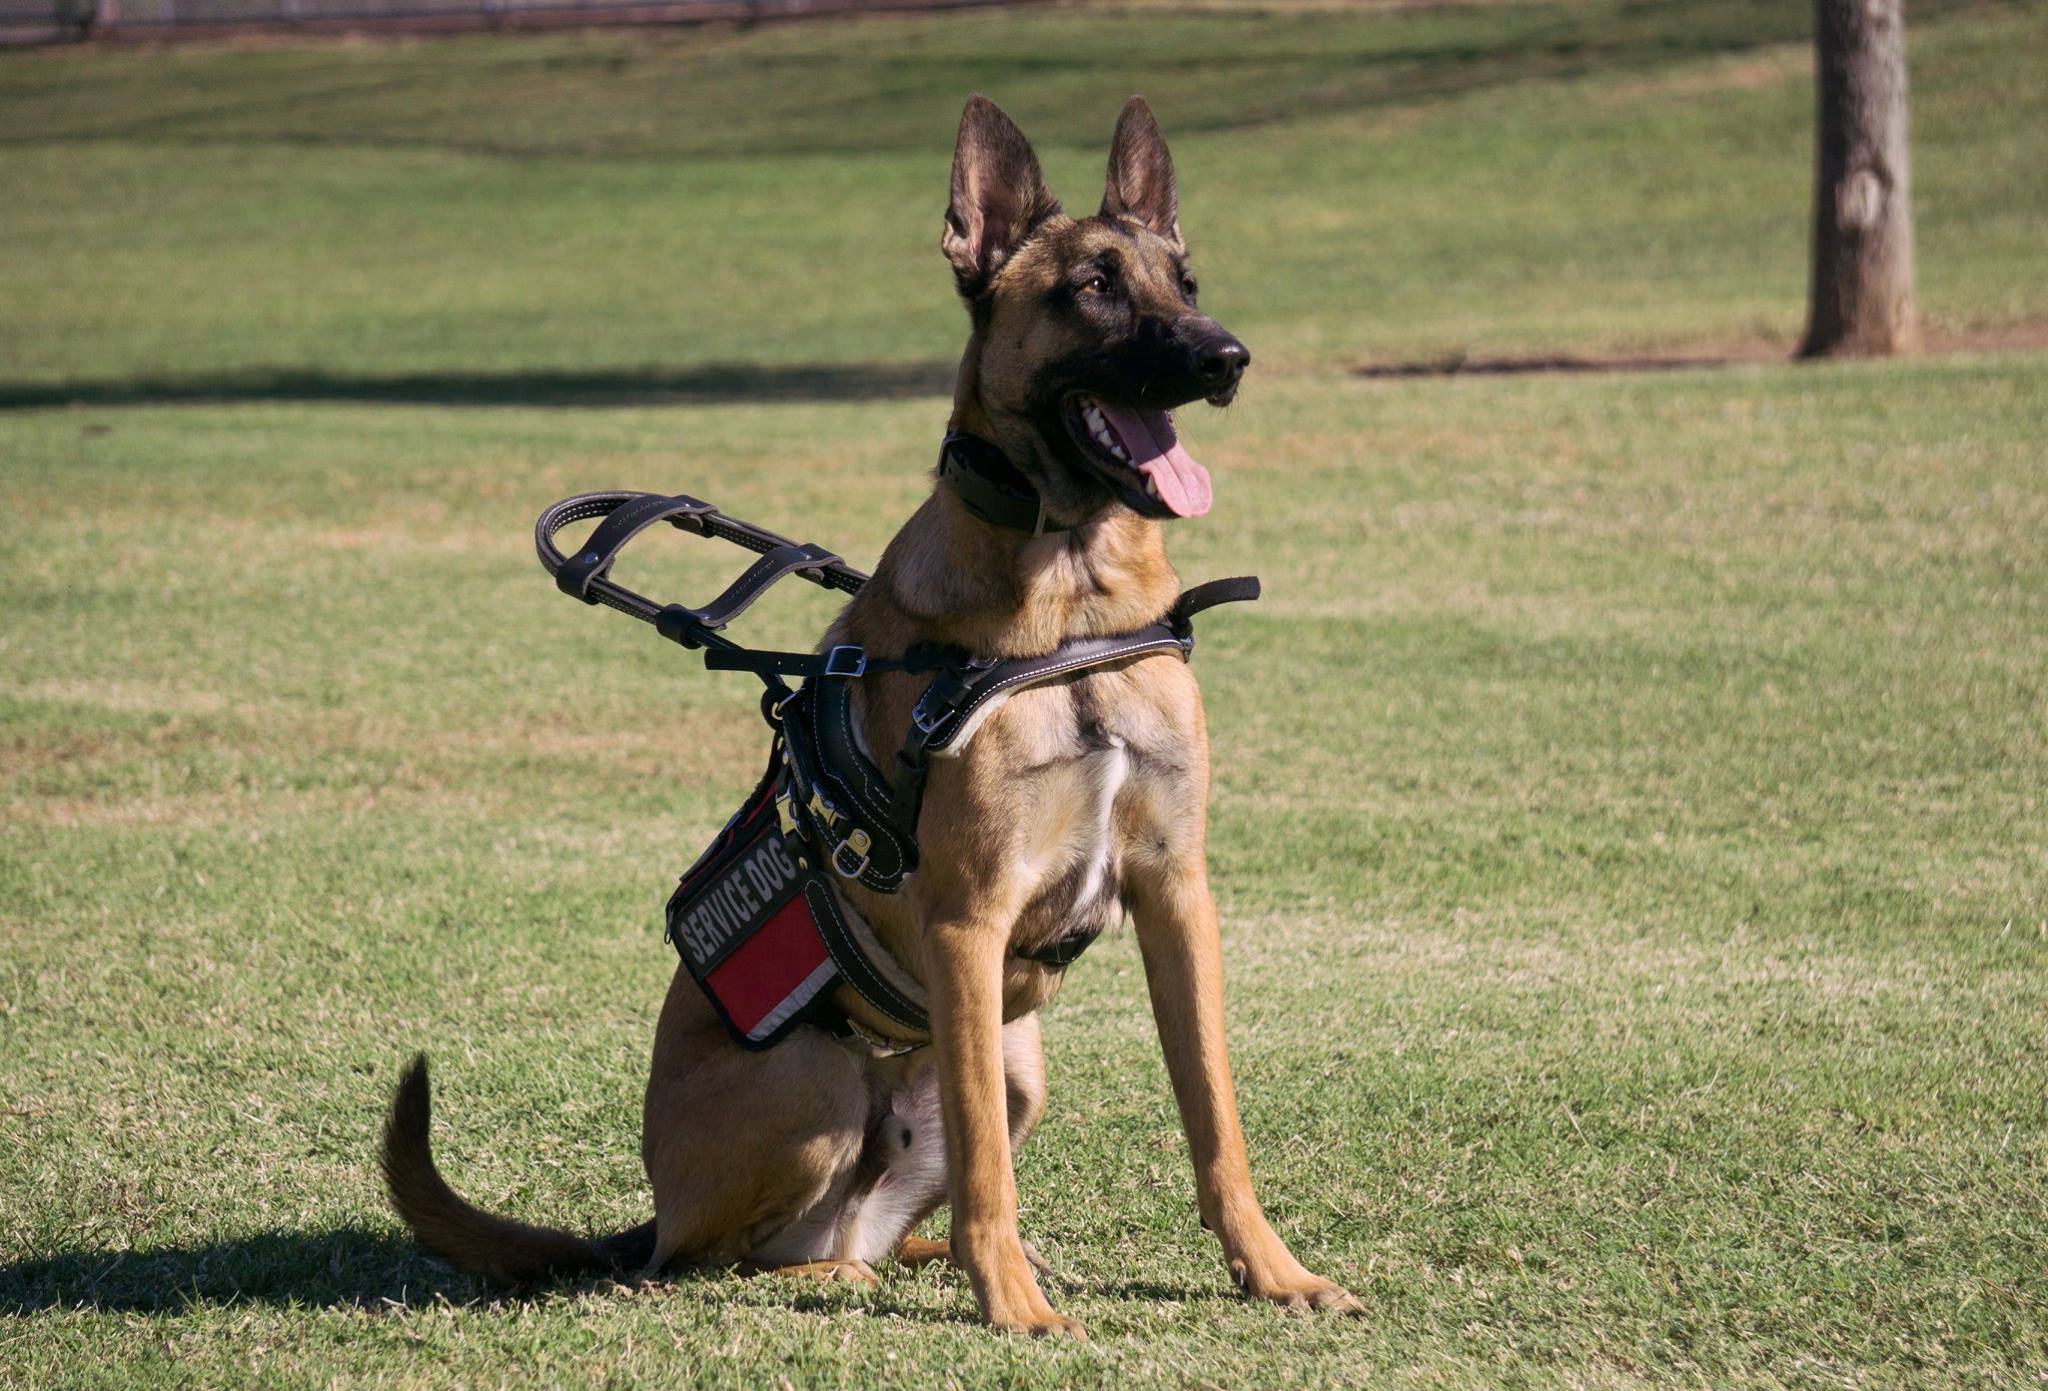 Spending Your Summer with a Service Dog in Dallas